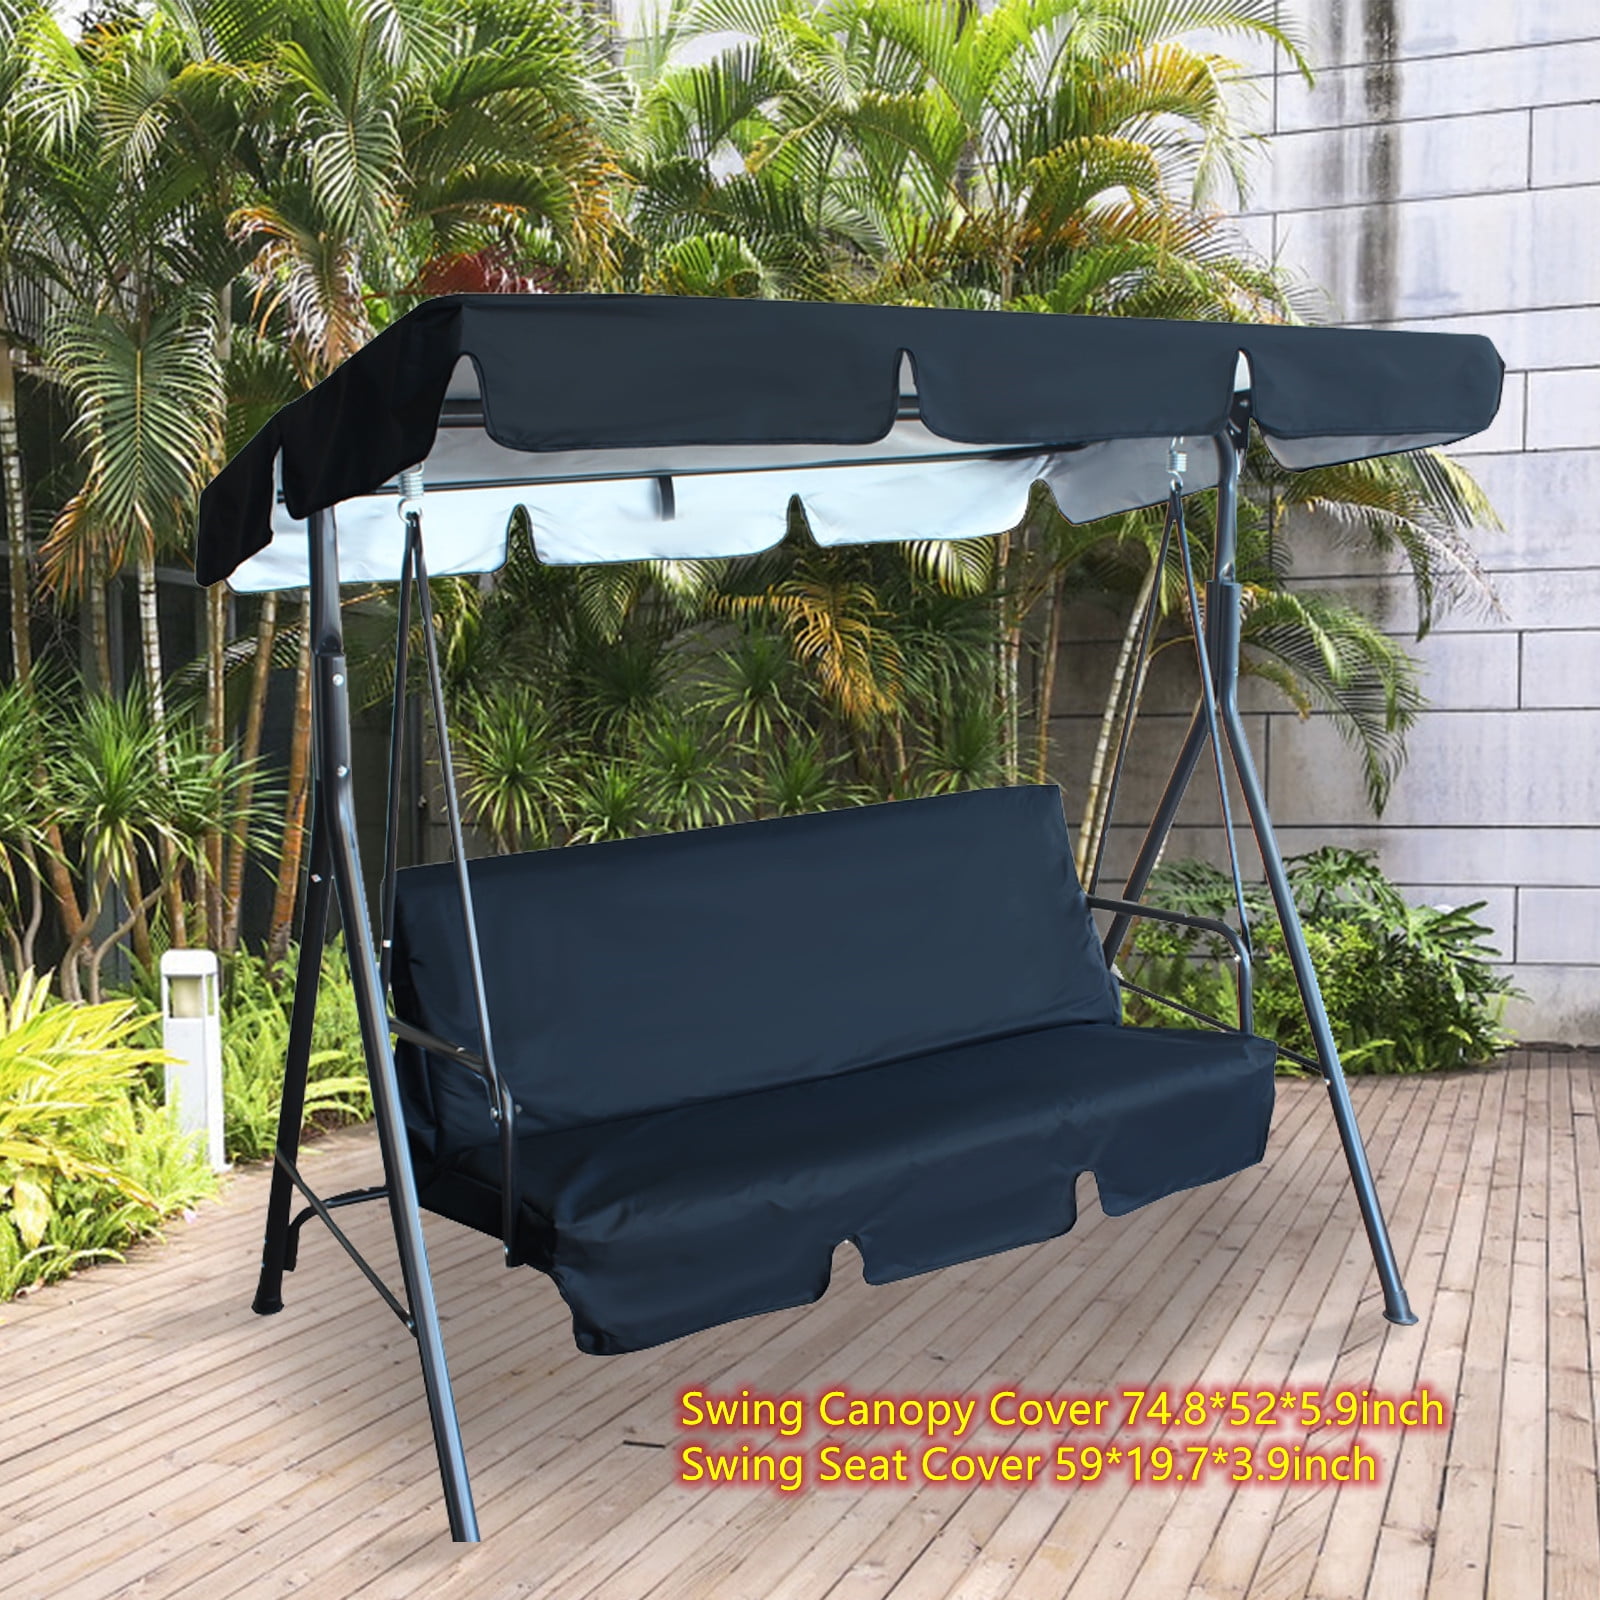 Details about   Garden Chair Hammock Cushion 3 Seater Replacement Swing Seat Canopy Cover Set 